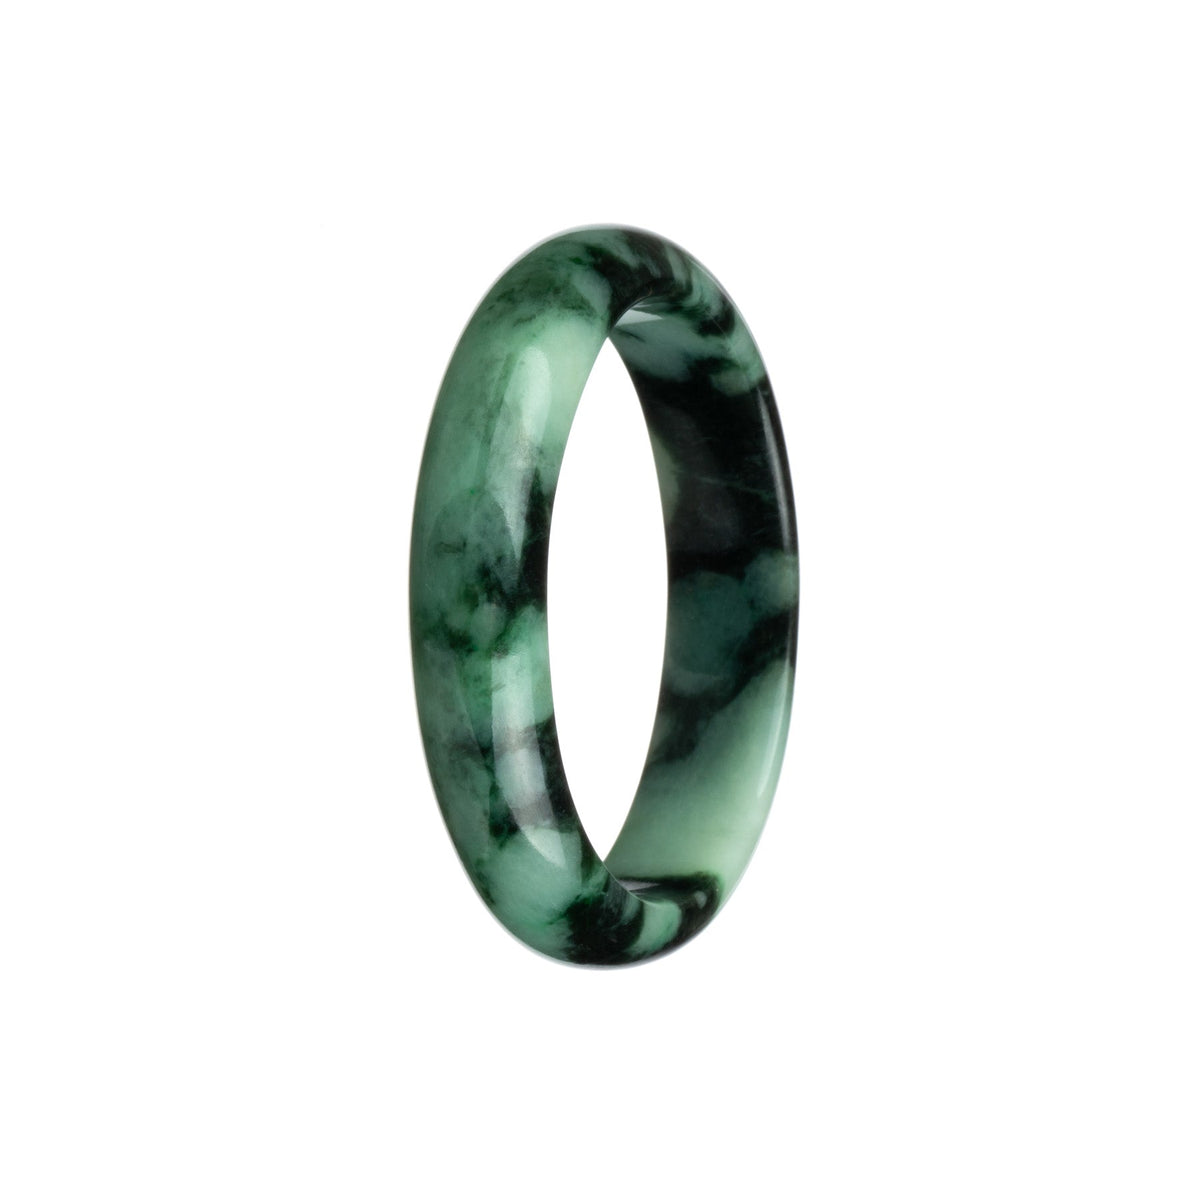 A close-up of a half moon-shaped jade bangle bracelet, featuring a beautiful natural green and black pattern. This authentic Burma jade bracelet is a stunning accessory from MAYS™.